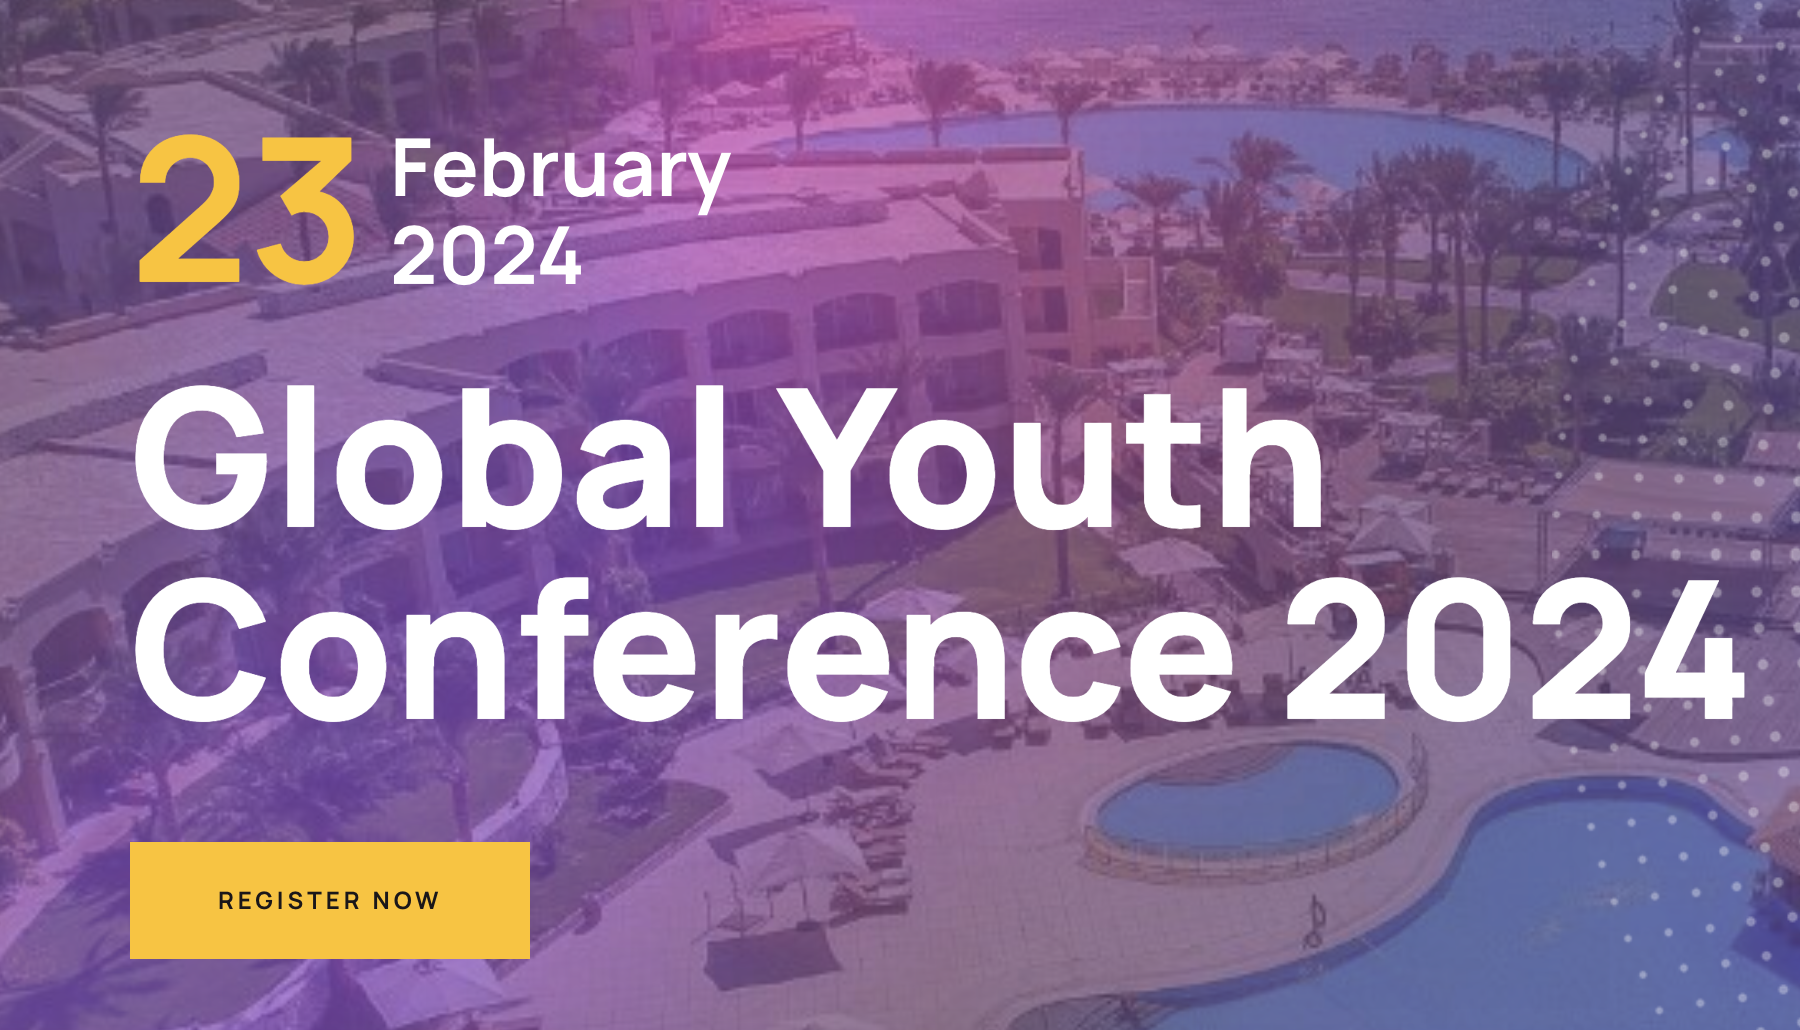 Global Youth Conference 2024 in Sharm El Sheikh, Egypt